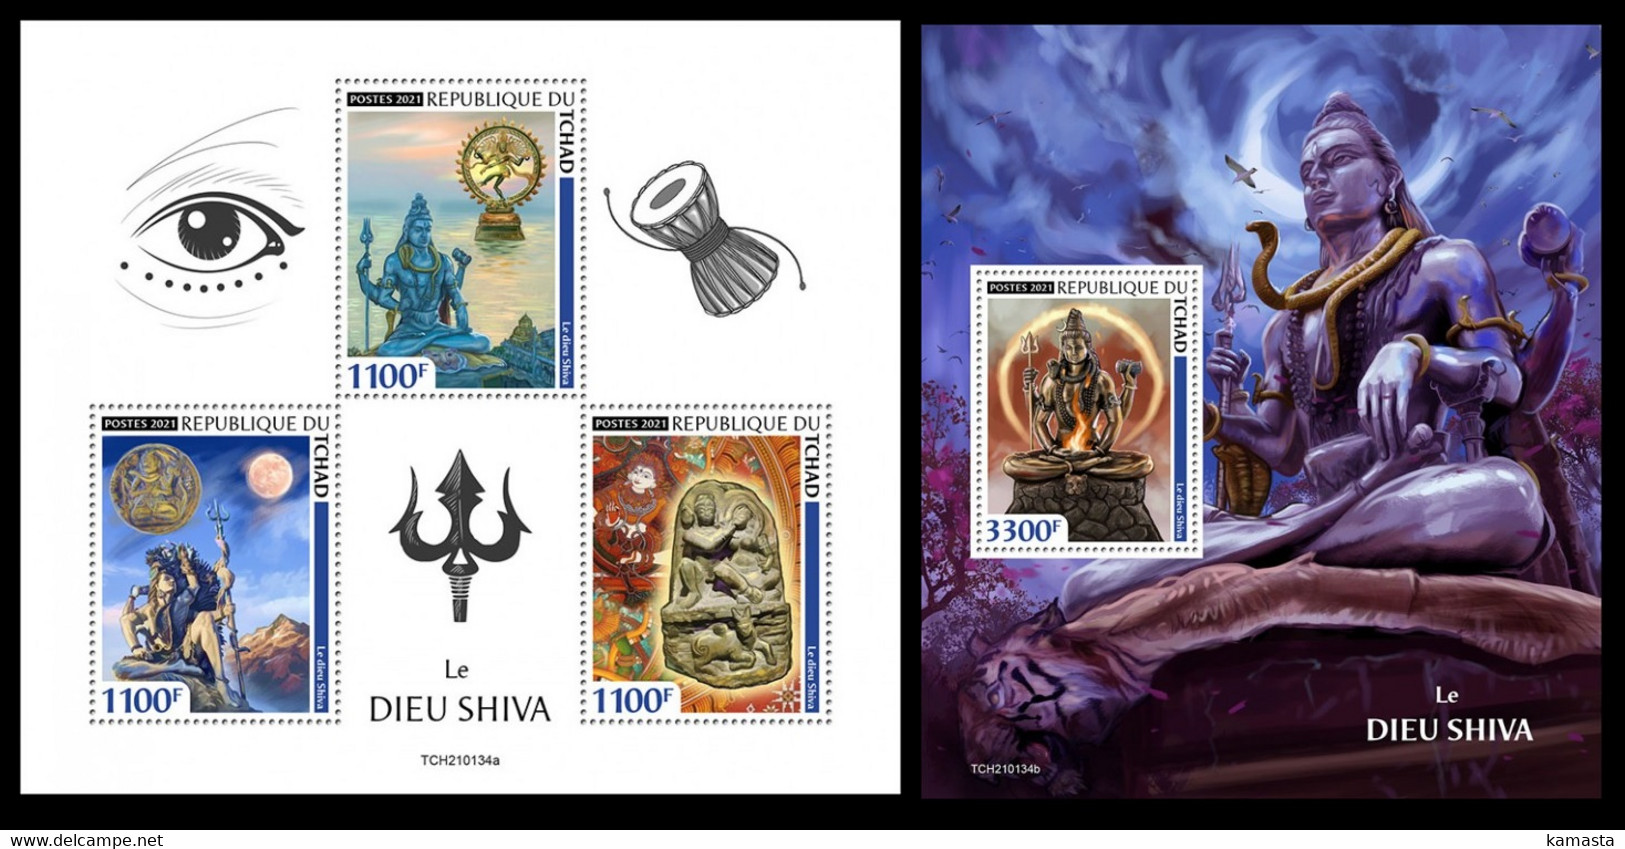 Chad 2021 God Shiva. (134) OFFICIAL ISSUE - Hinduism